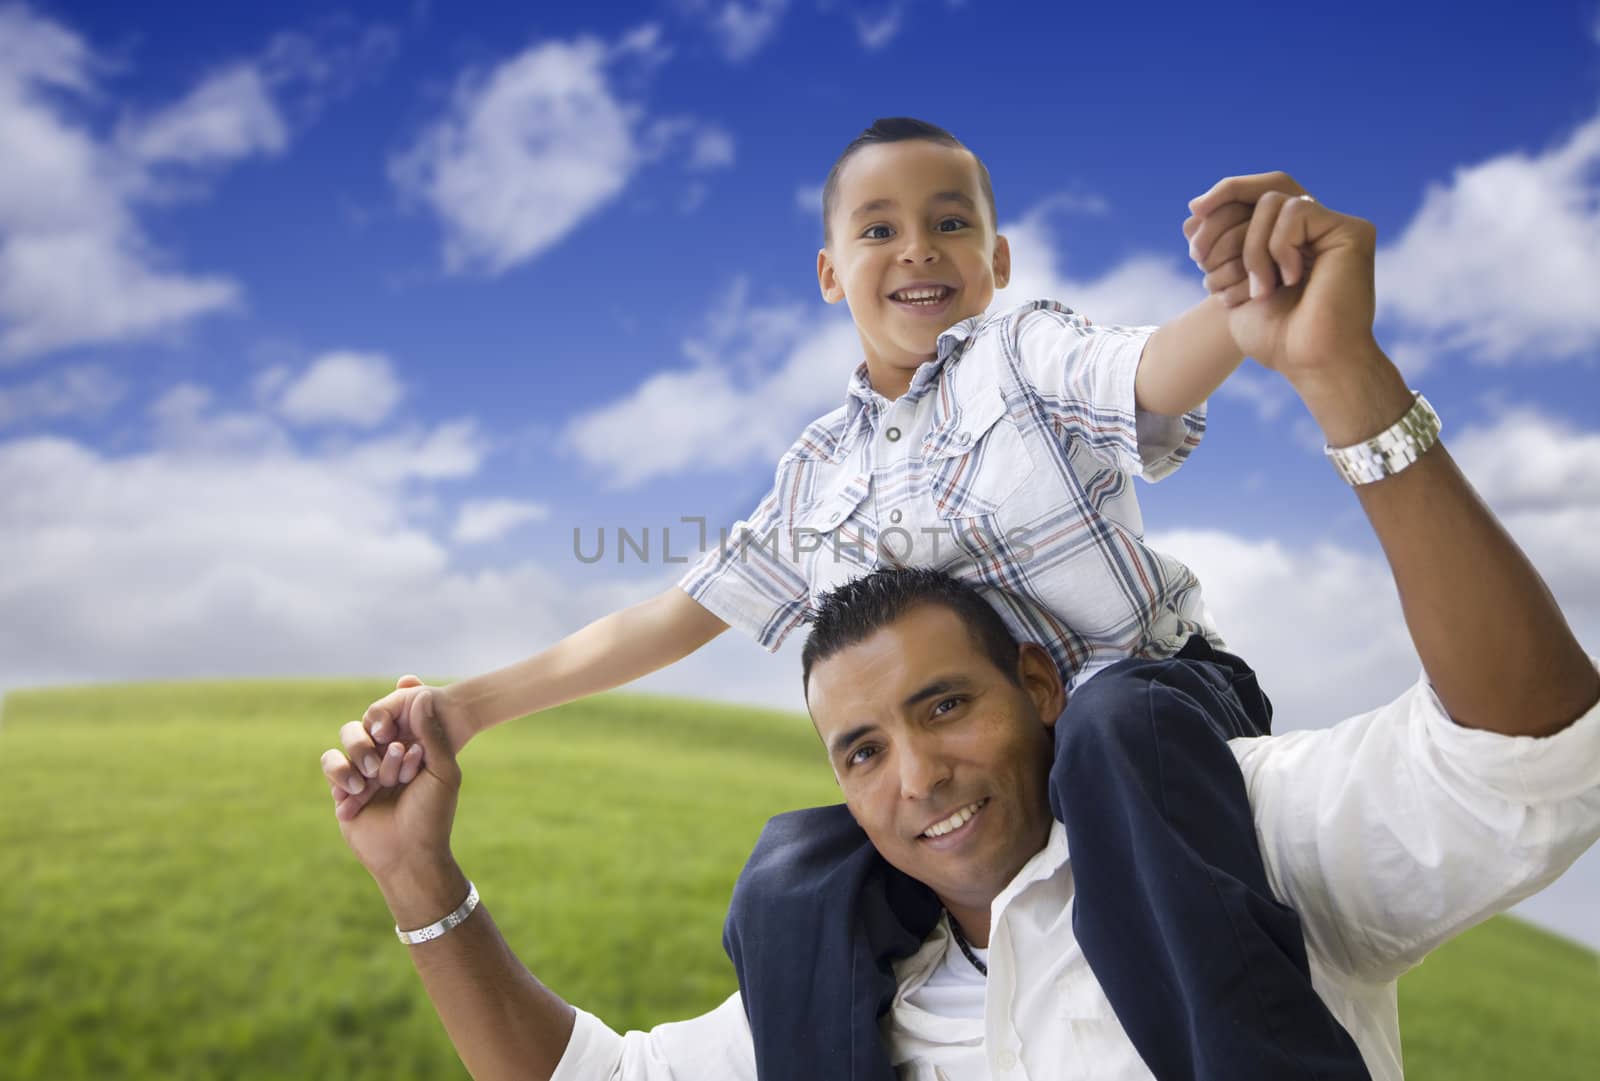 Hispanic Father and Son Having Fun Together in the Park.